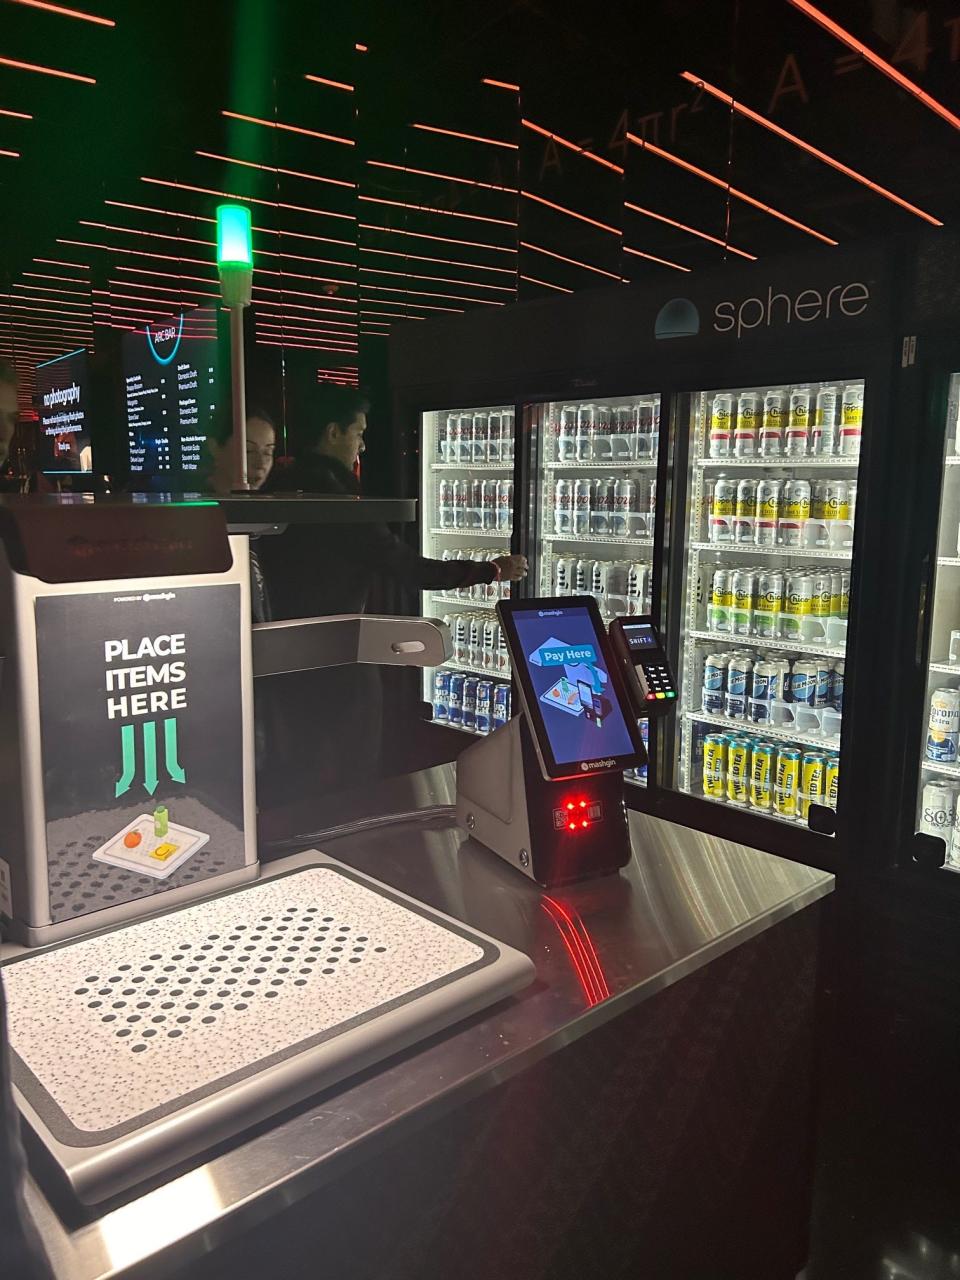 Automated cash register for drinks at the Las Vegas Sphere